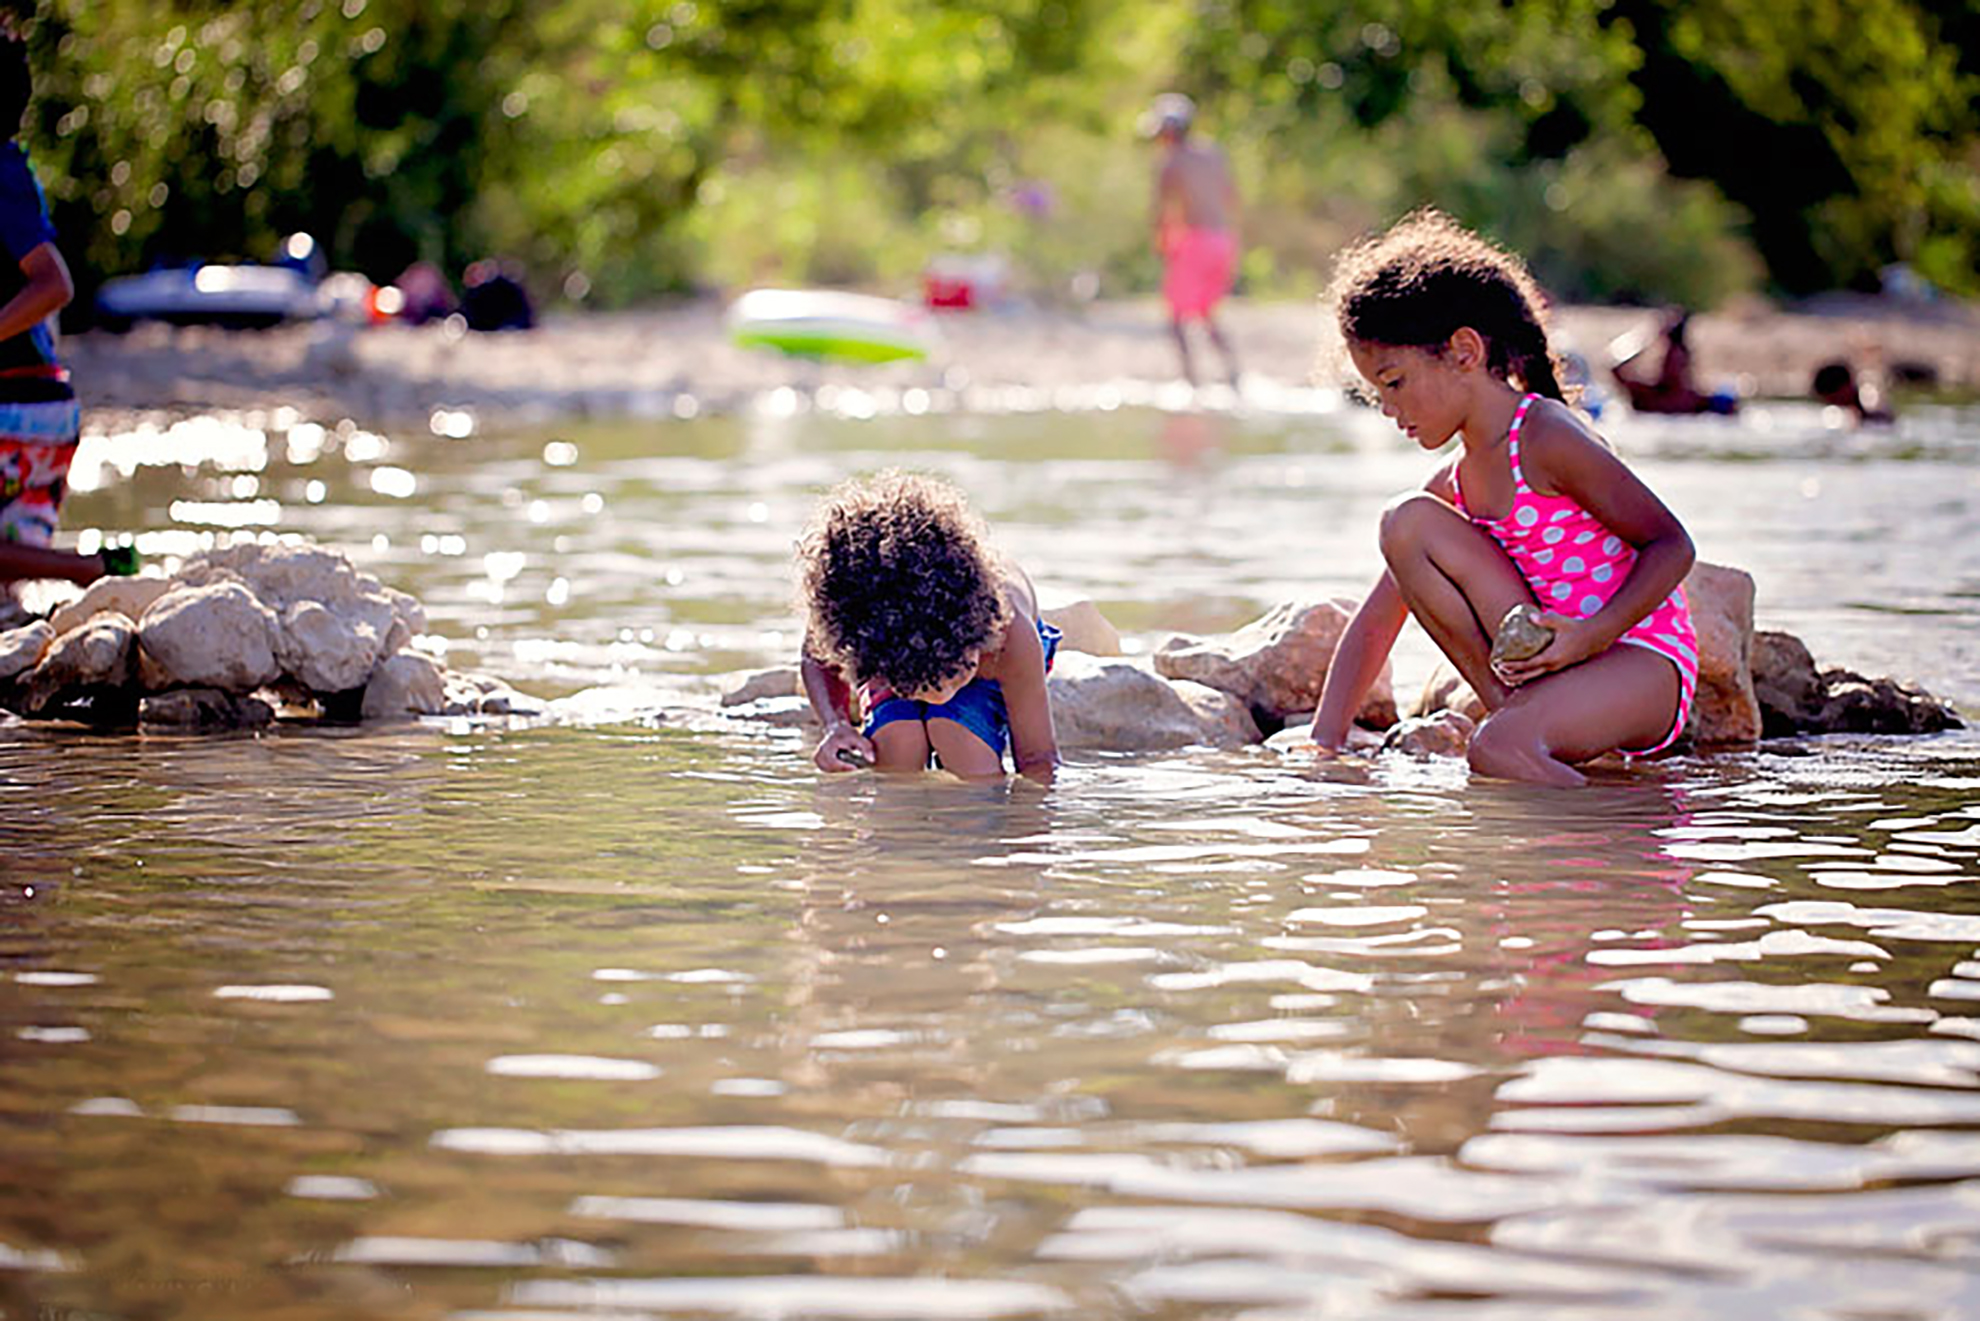 Children playing in the water